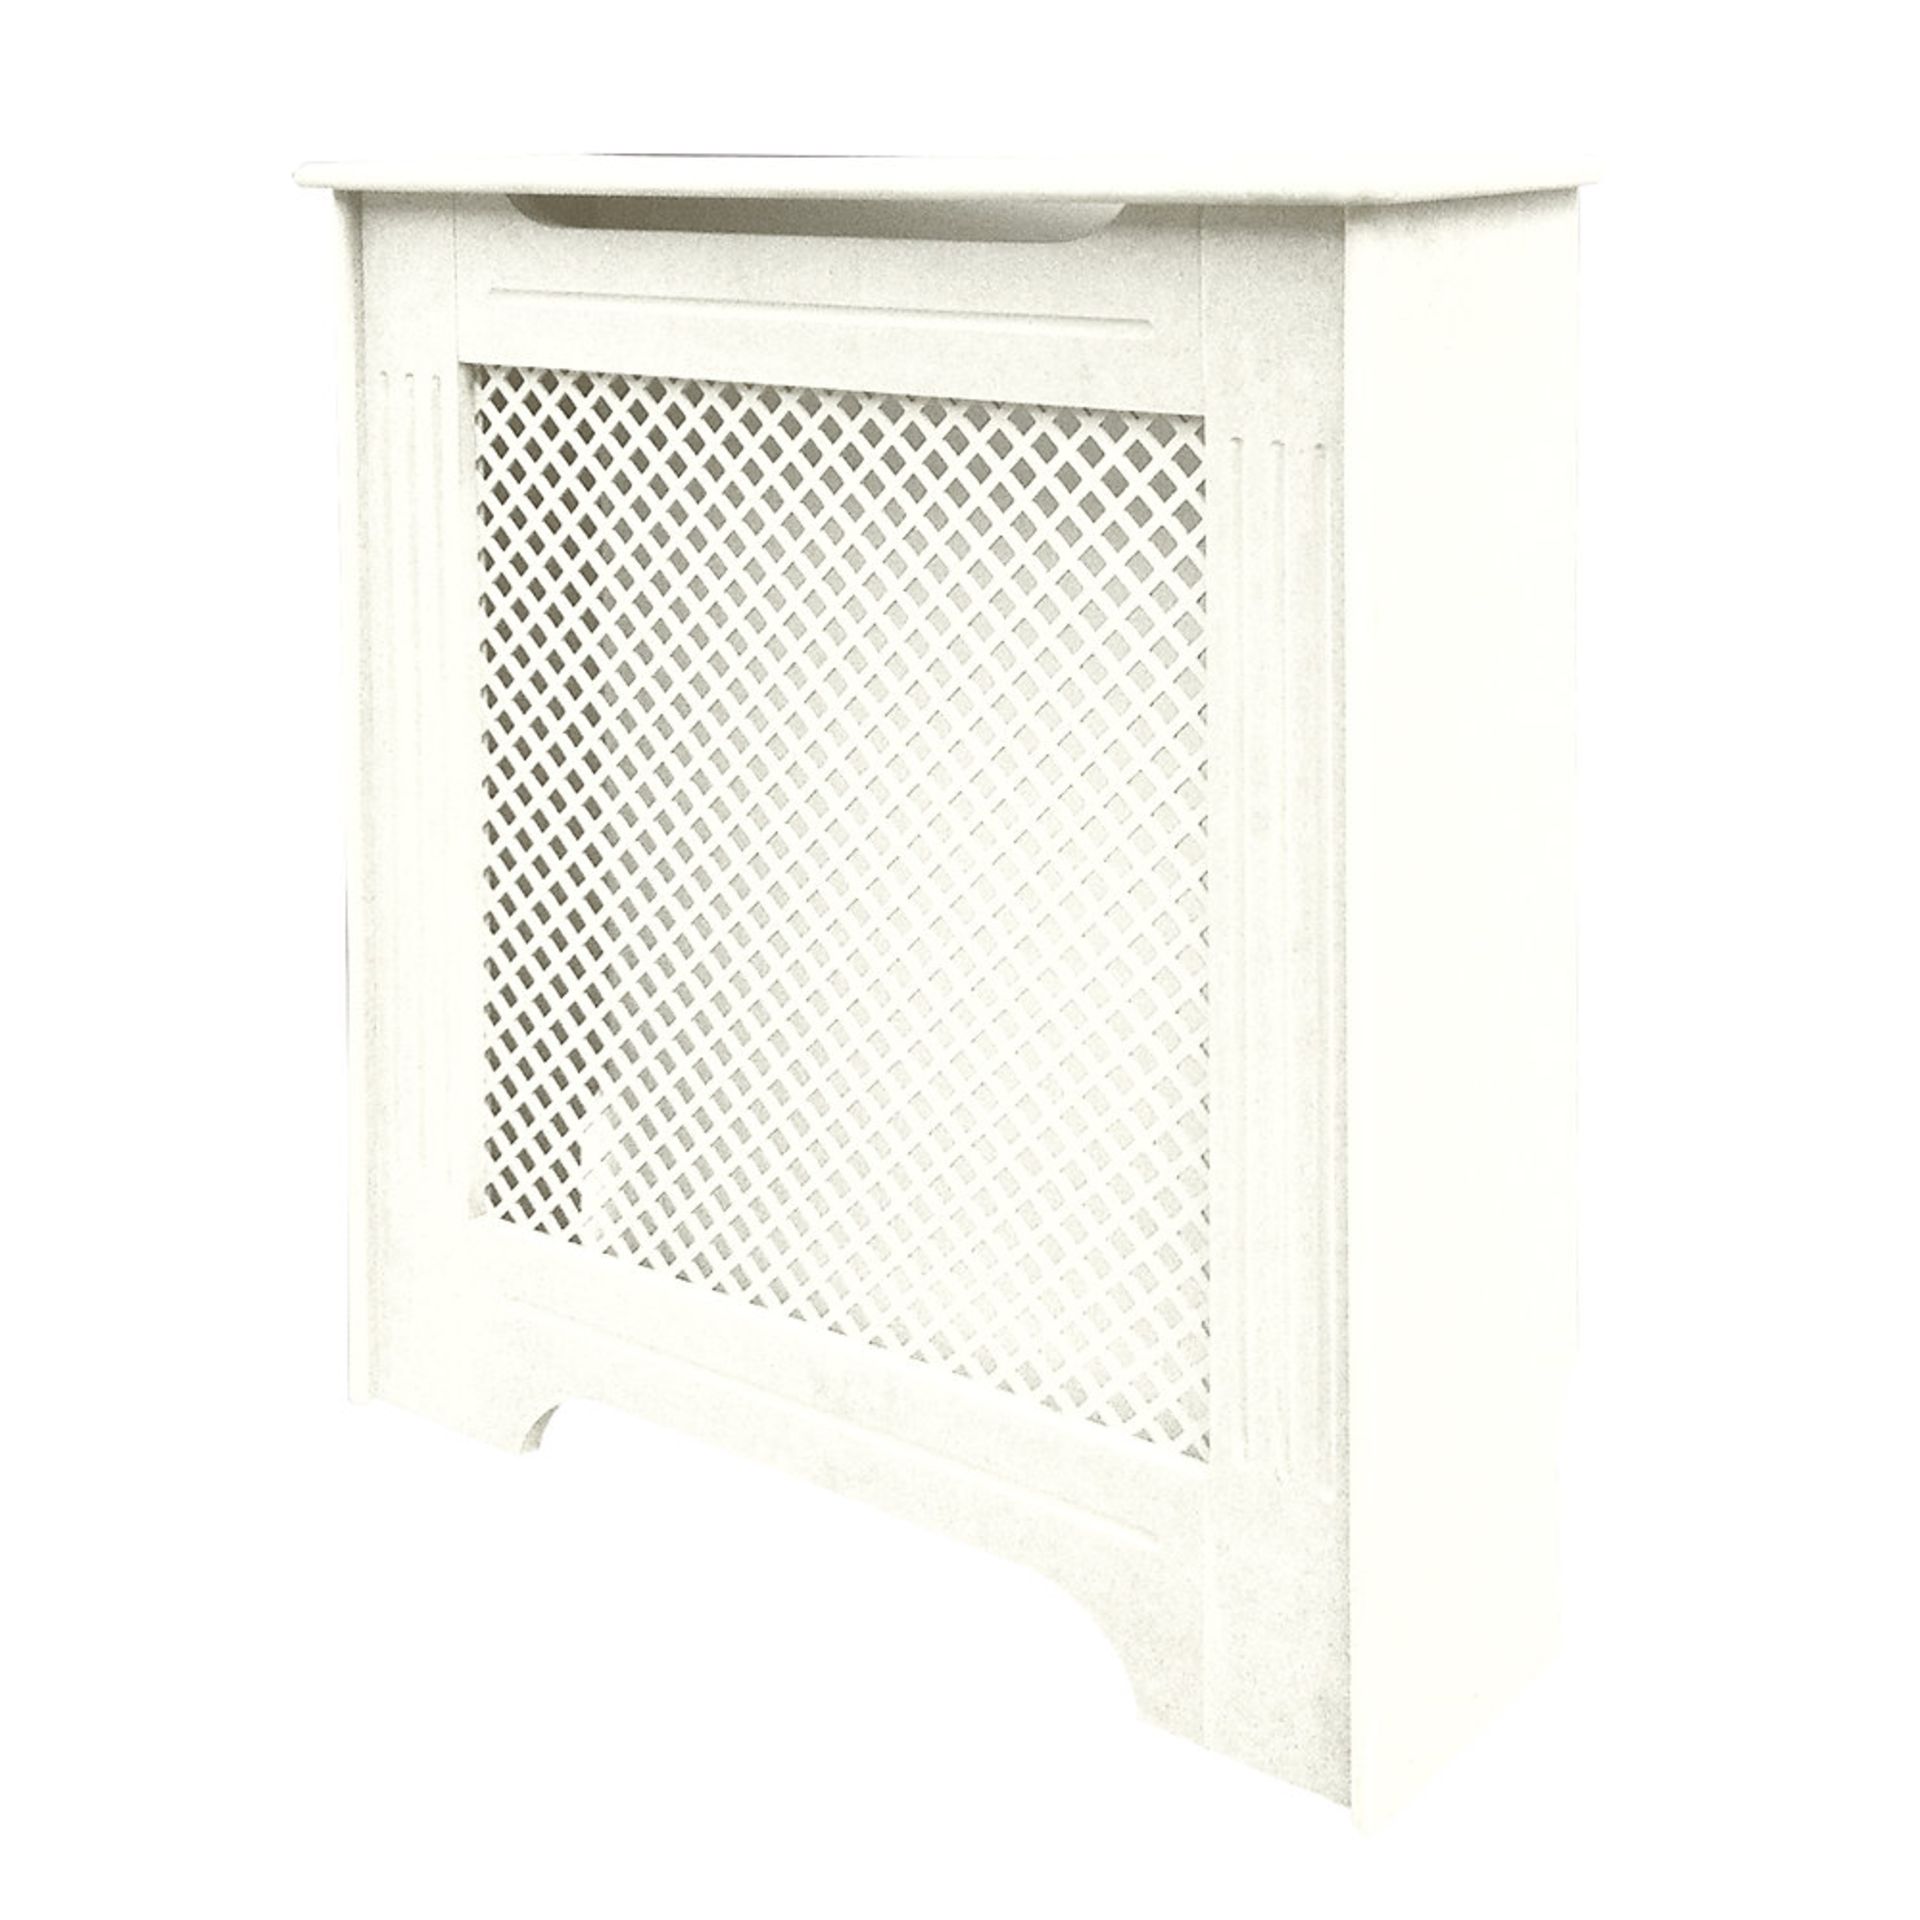 (PP197) 820 X 210 X 868MM VICTORIAN RADIATOR CABINET WHITE. RRP £114.99. White finish. Provides a